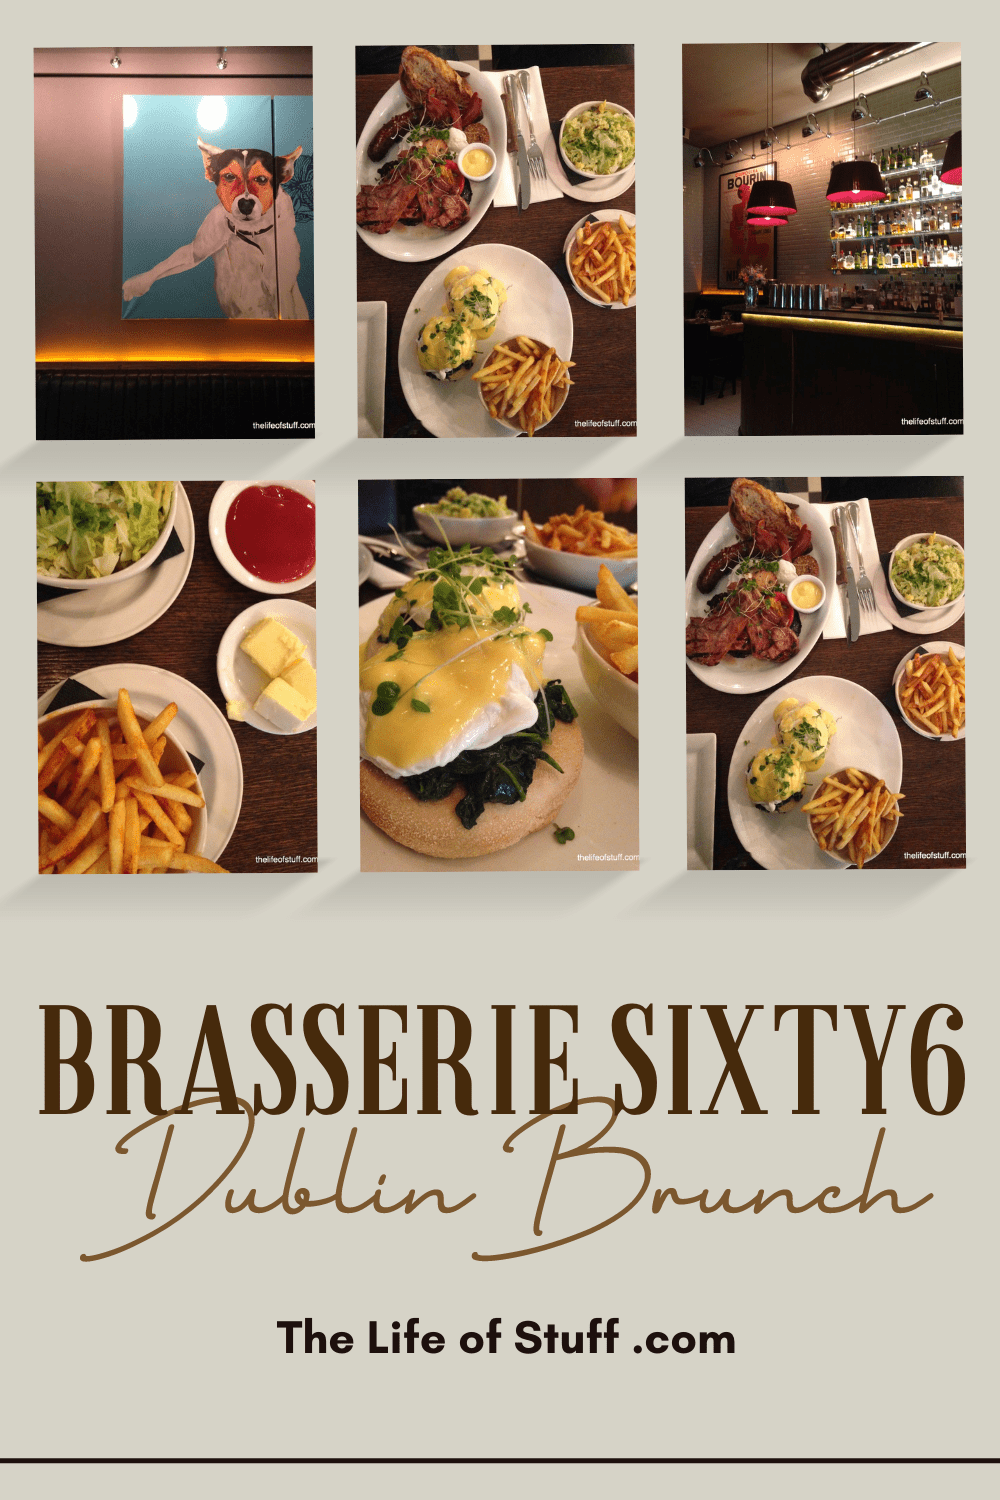 Brunch at Brasserie Sixty6, South Great George’s St, Dublin 2 - The Life of Stuff